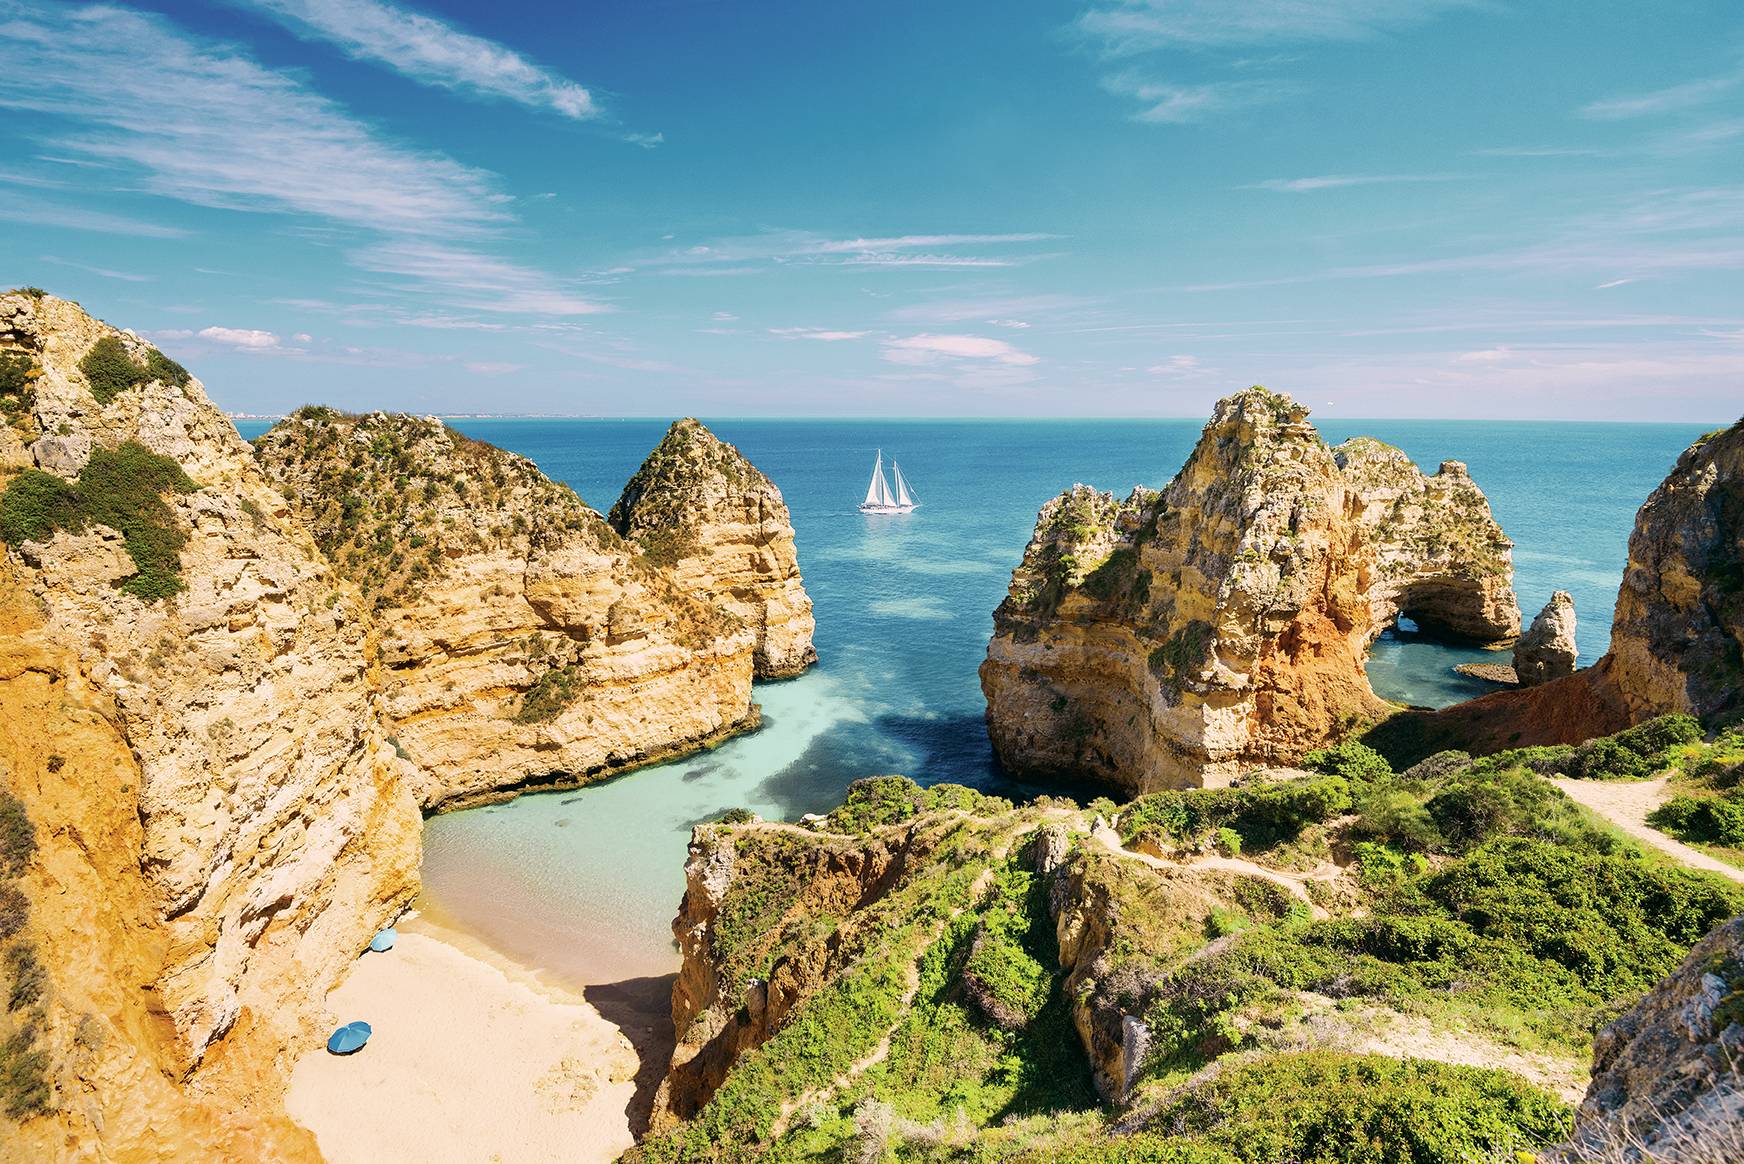 High End Beach Resort and  Residence in Algarve Portugal- The Nomad Bay Project